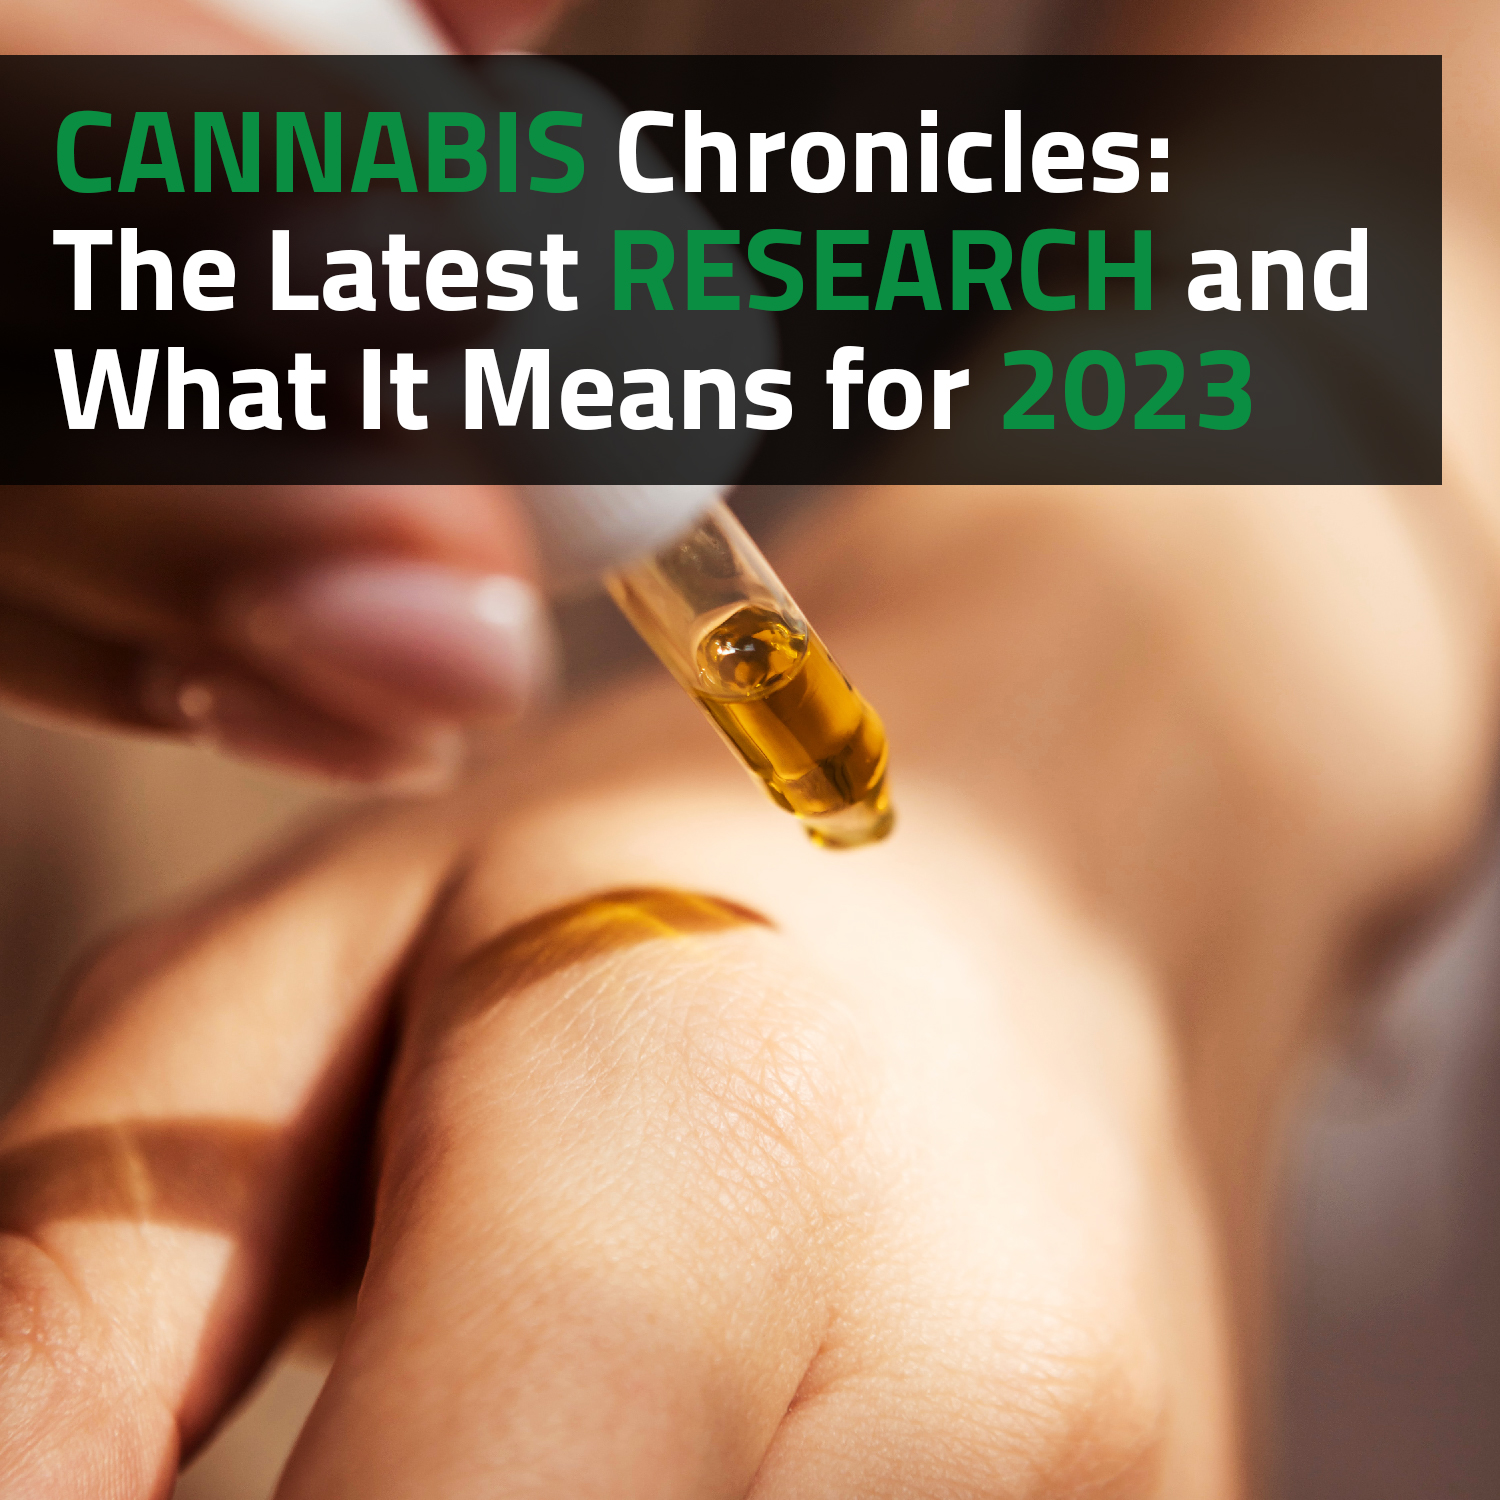 Cannabis Chronicles: The Latest Research And What It Means For 2023